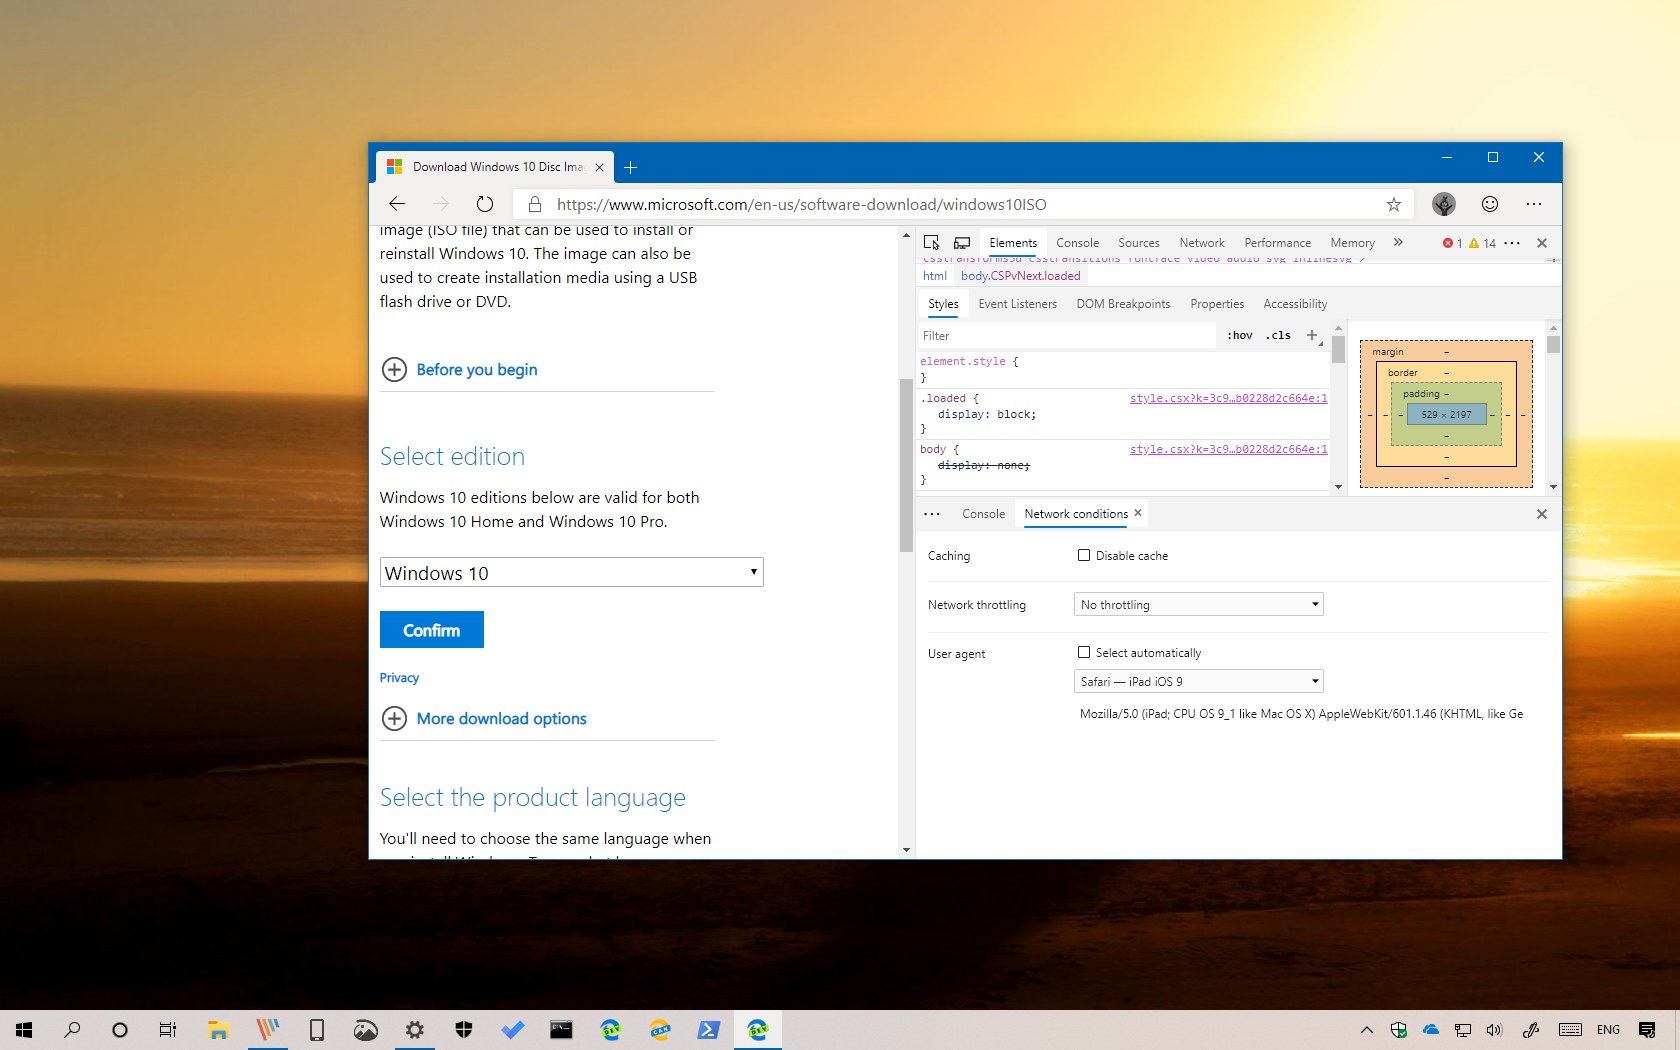 download windows 10 iso without media creation tool